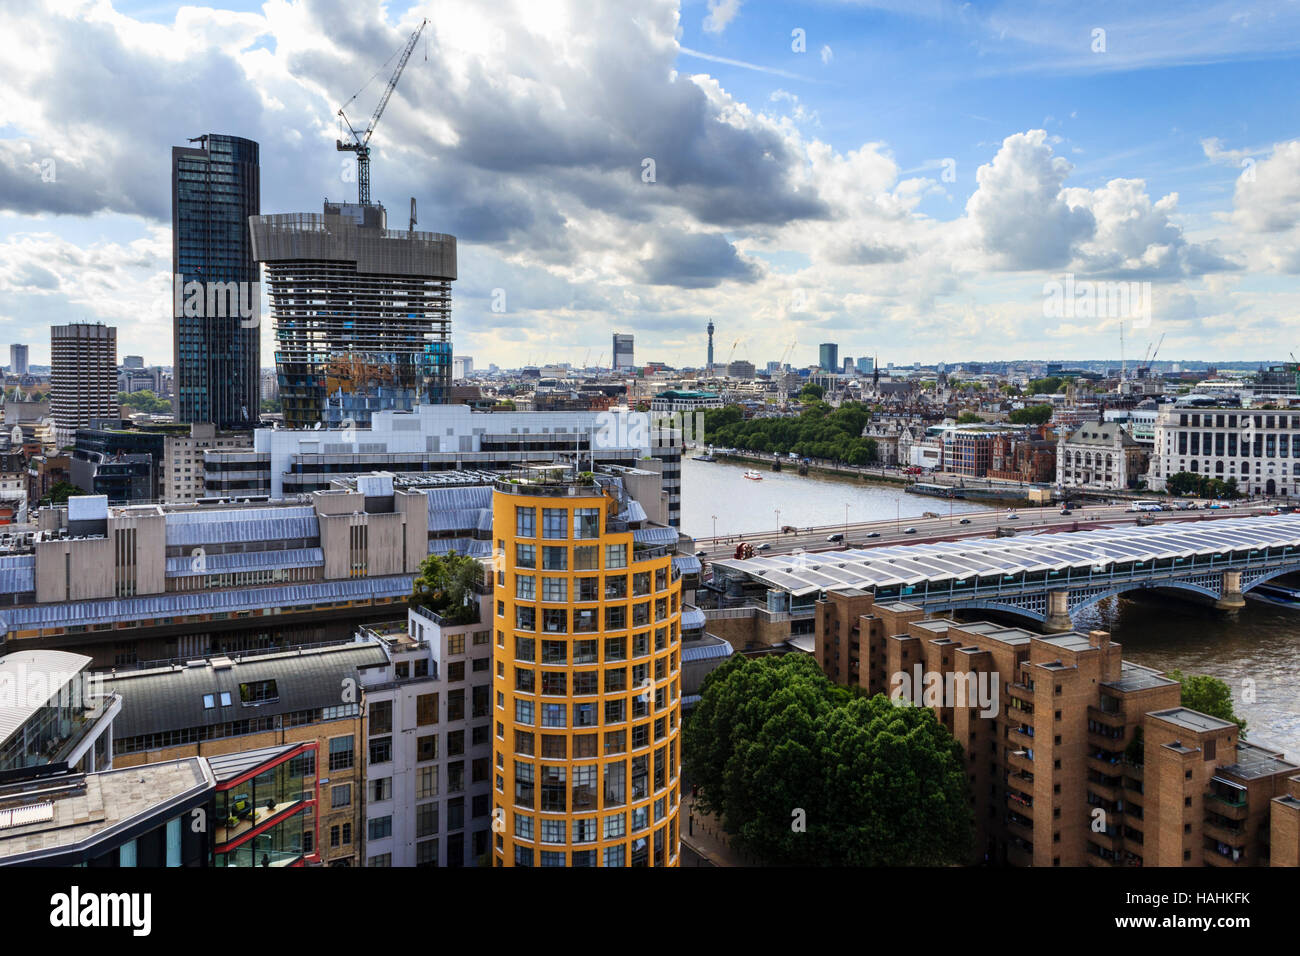 View over Blackfriars from the viewing gallery of Tate Modern, construction beginning on 'The Vase', Bankside, London, UK Stock Photo